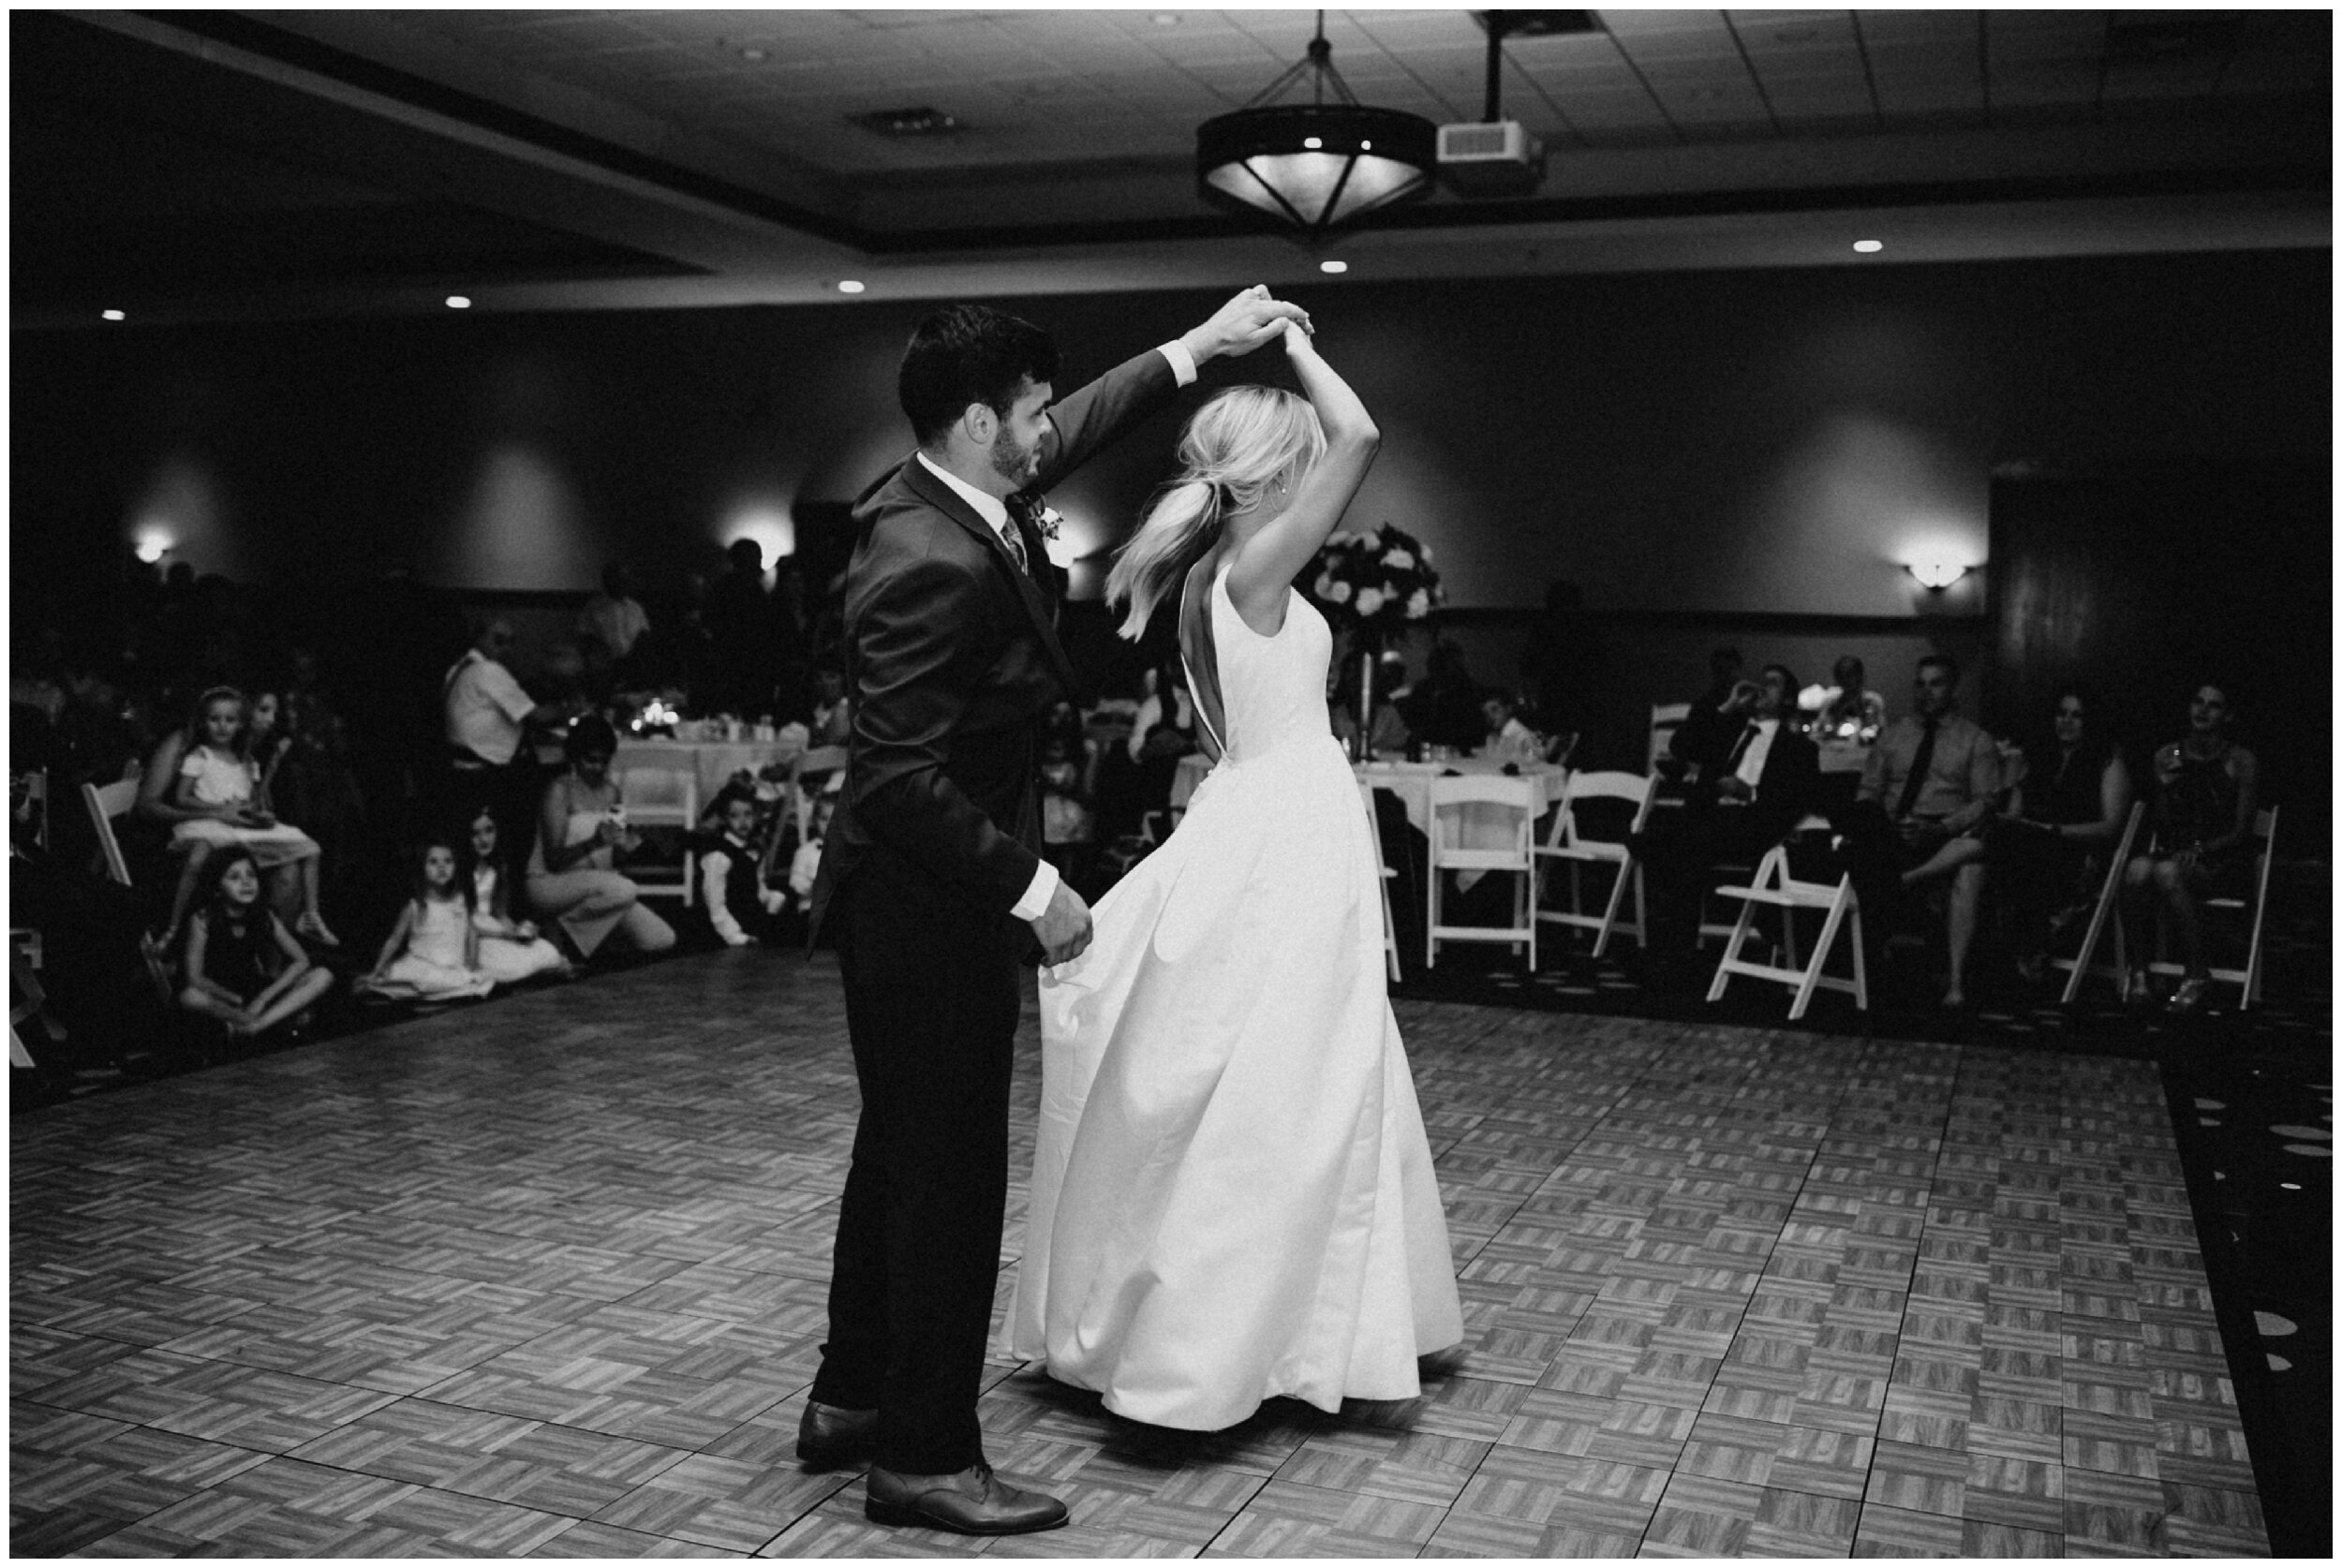 Bride and groom wedding dance at Grand View Lodge